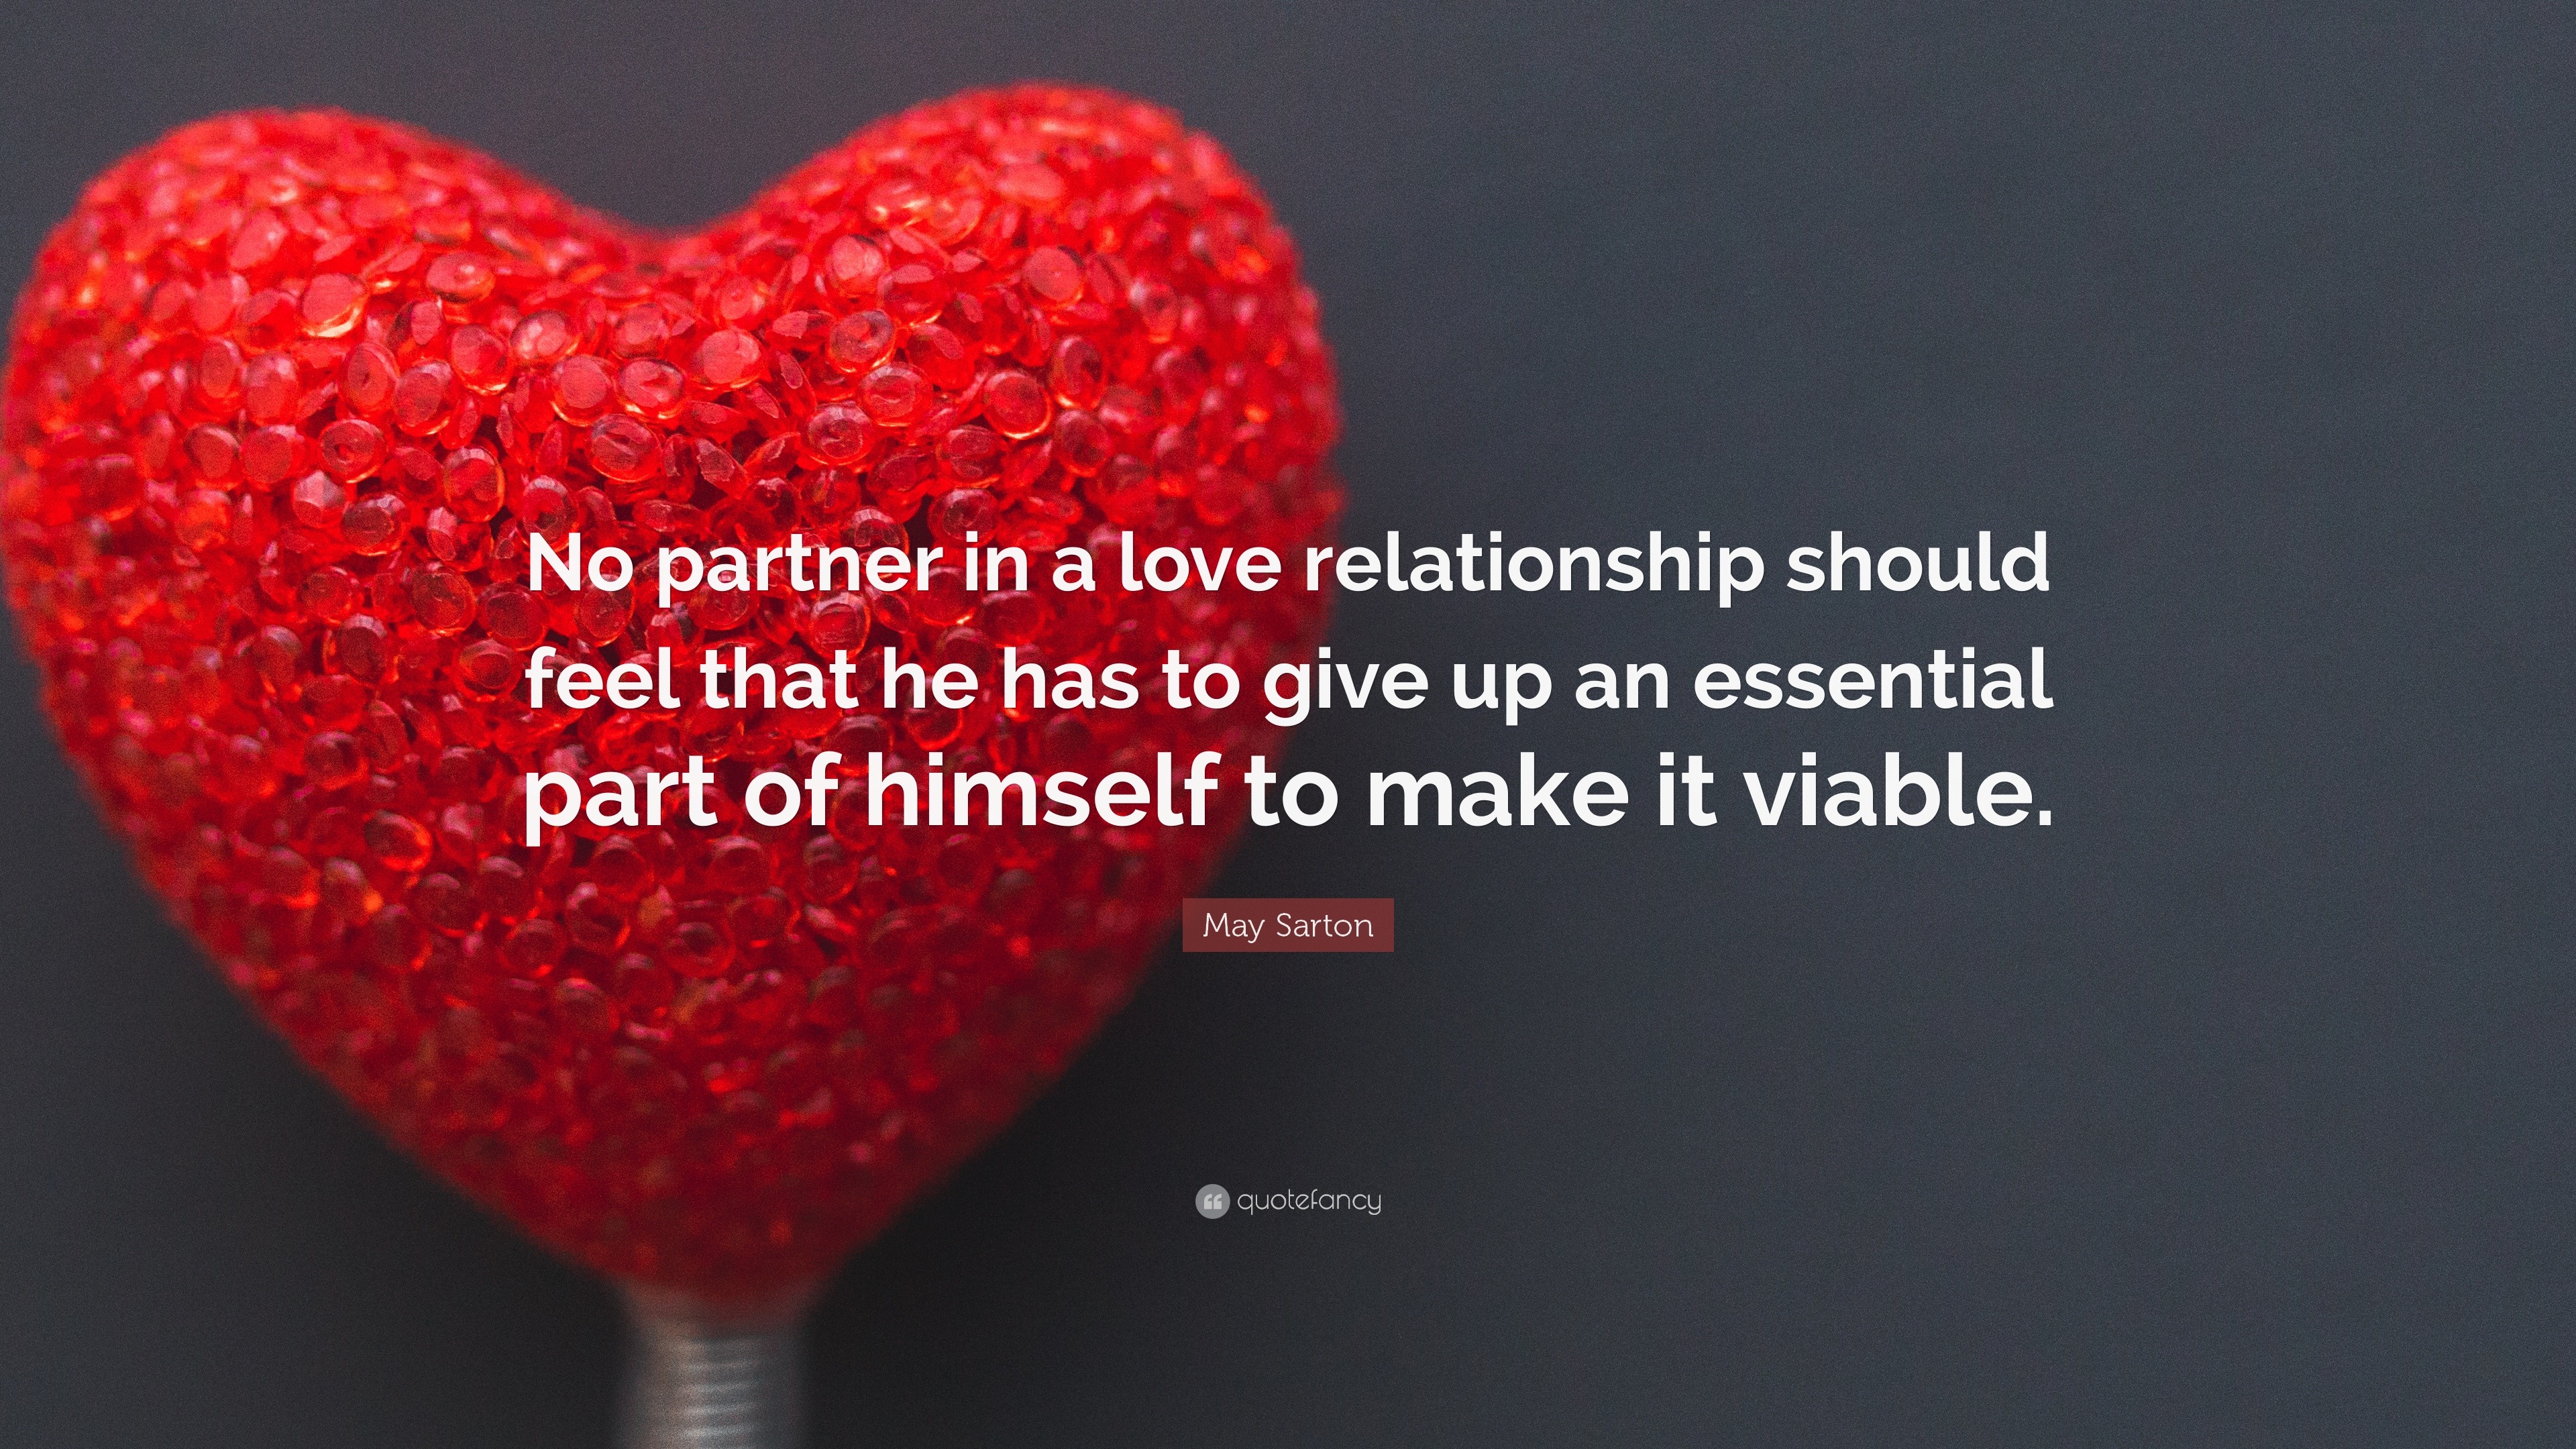 may sarton quote no partner in a love relationship should feel that he has to give up an essential part of himself to make it viable 26 wallpapers quotefancy may sarton quote no partner in a love